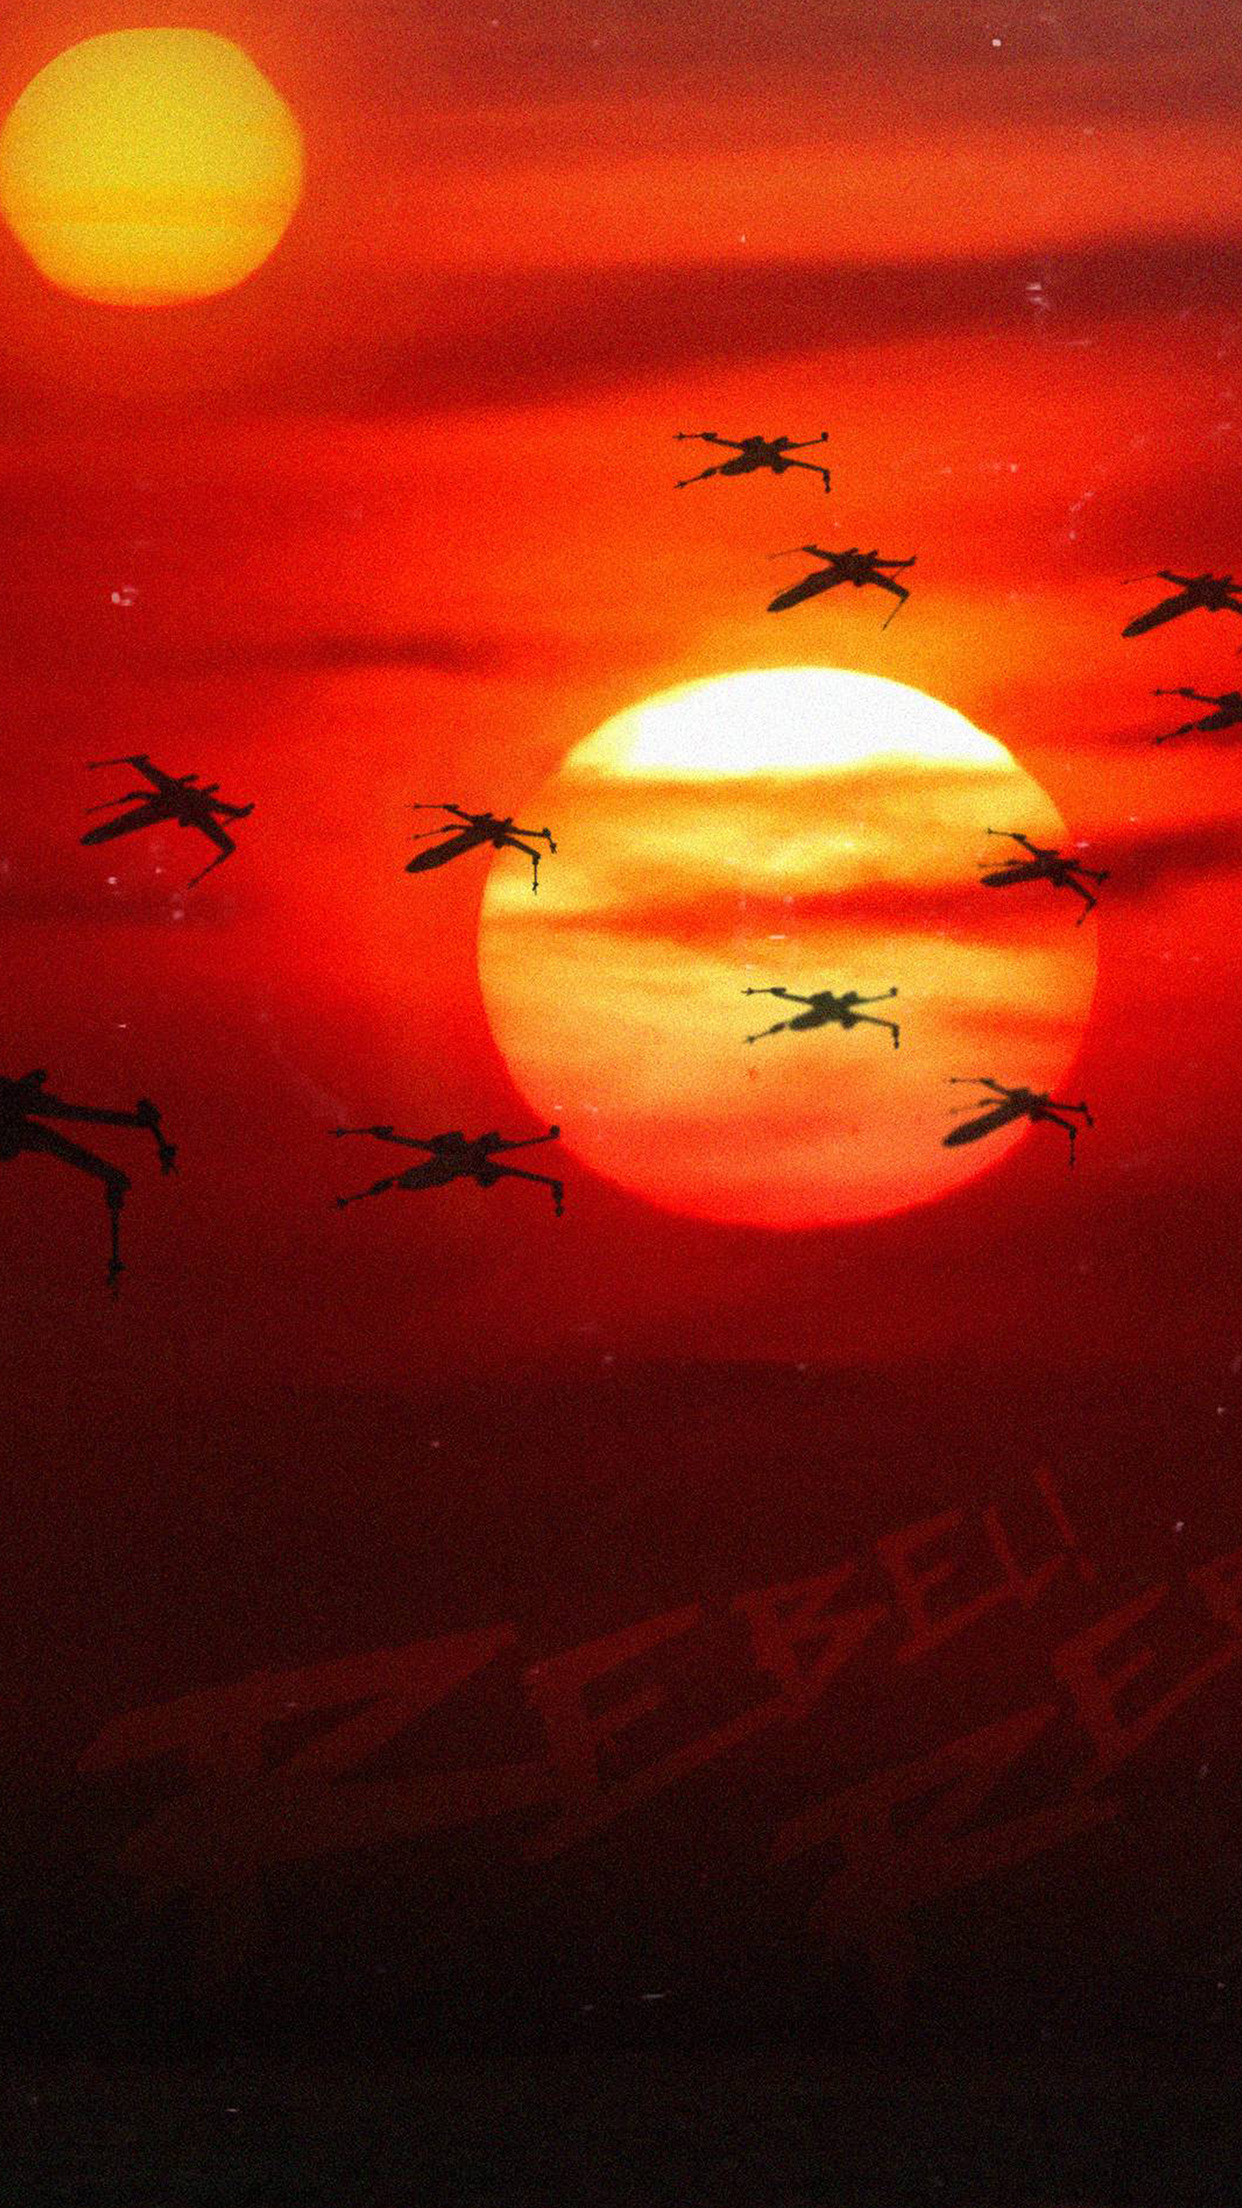 rogue one iphone wallpaper,sky,red,red sky at morning,sunset,sunrise